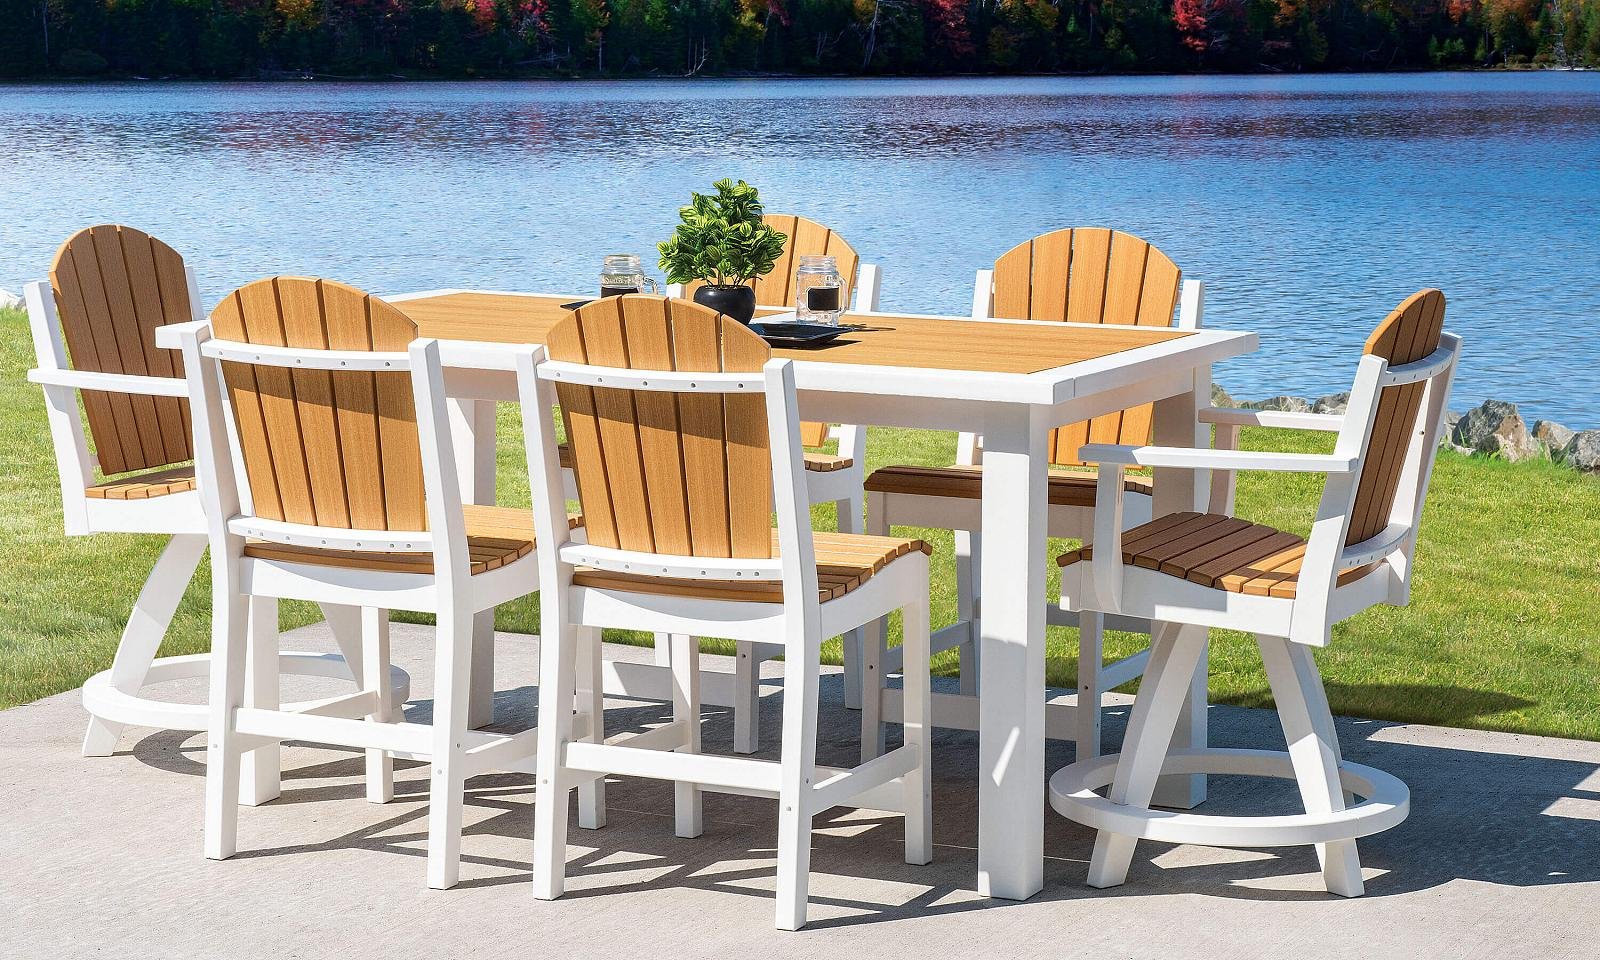 EC-Woods-Shawnee-Chairs-Tacoma-Table-Counter-Height-Outdoor-Poly-Furniture-Set-Natural-Teak-Bright-White.jpeg